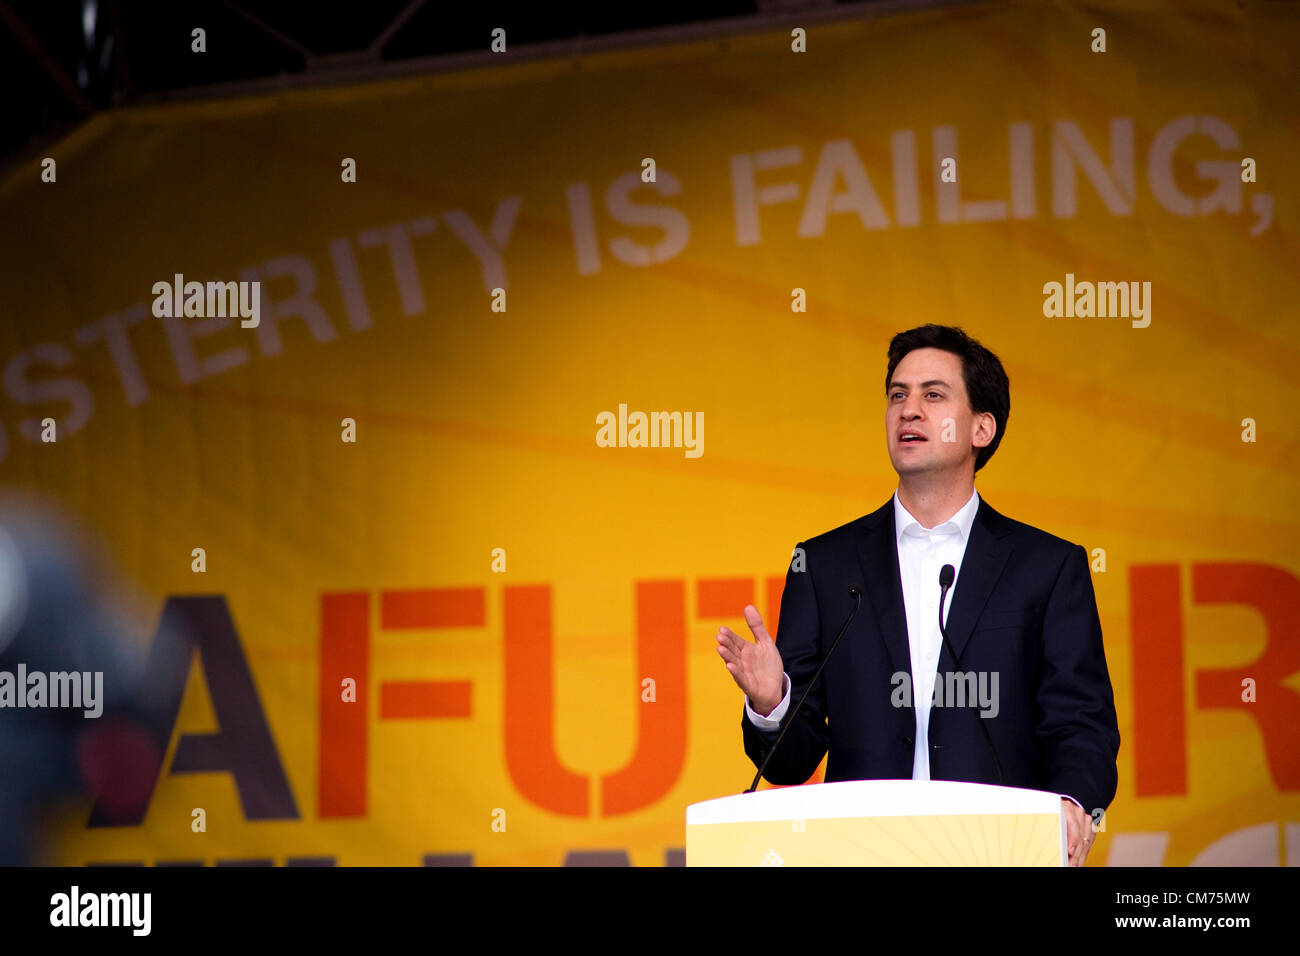 London, UK. 20th October 2012. Ed Miliband at TUC Rally in Hyde Park. Credit:  Stephen Burrows / Alamy Live News Stock Photo